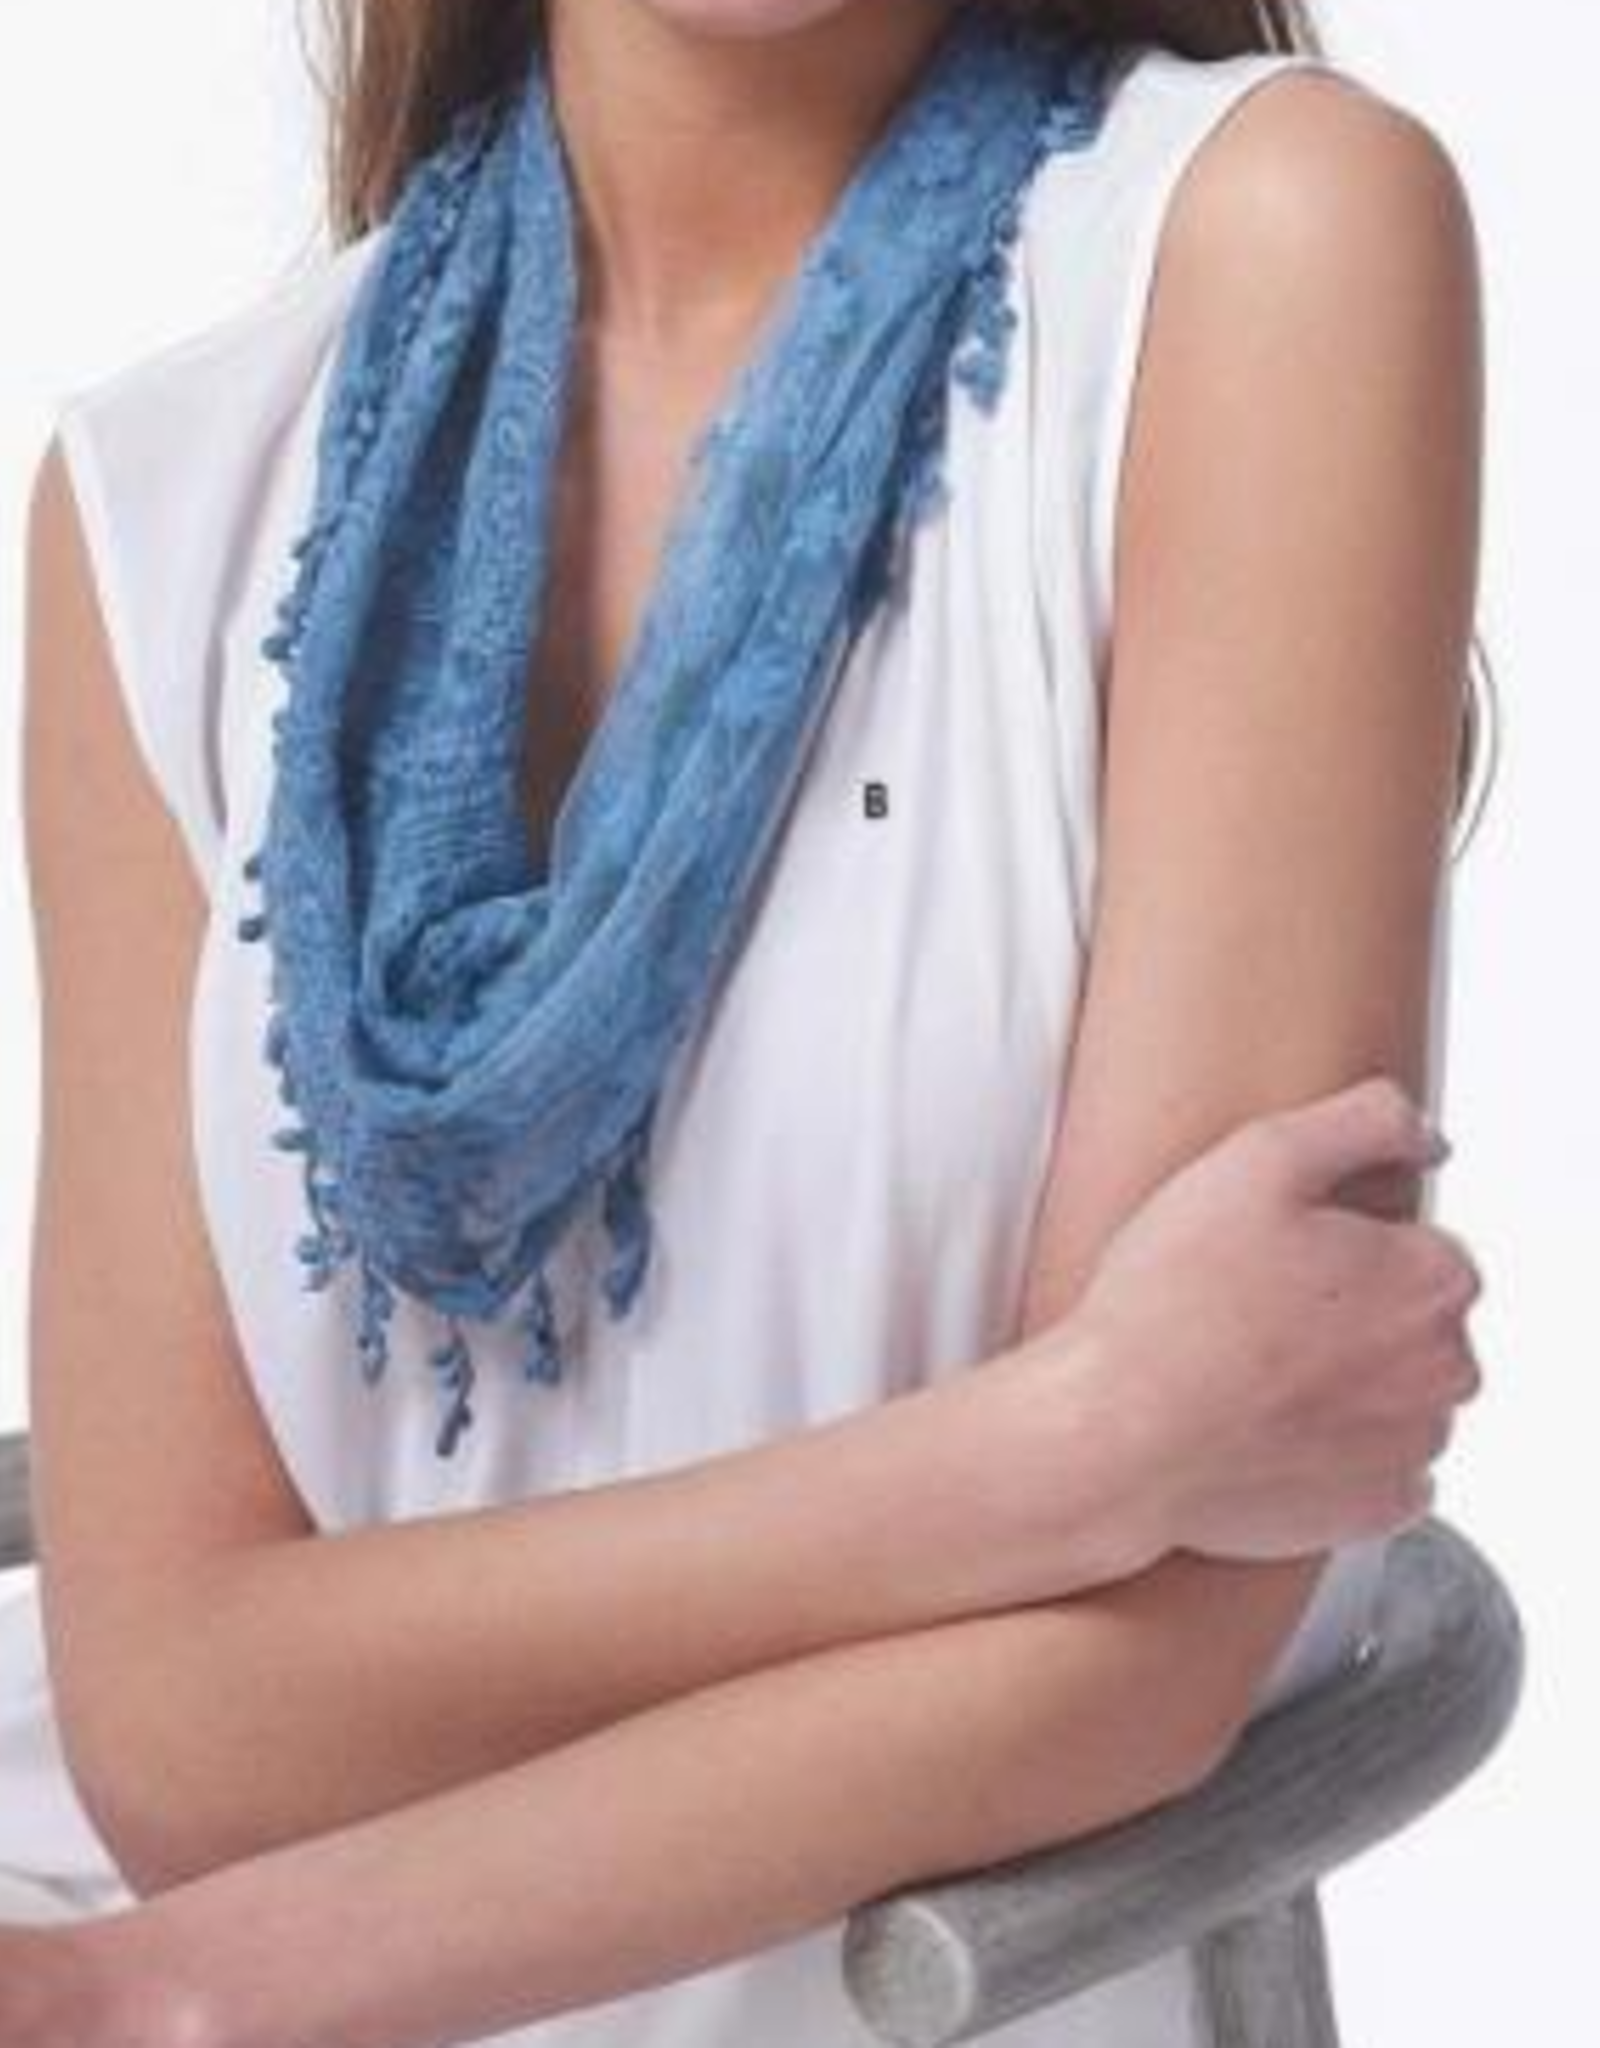 K & K Magnetic Scarf - Paisley Lace